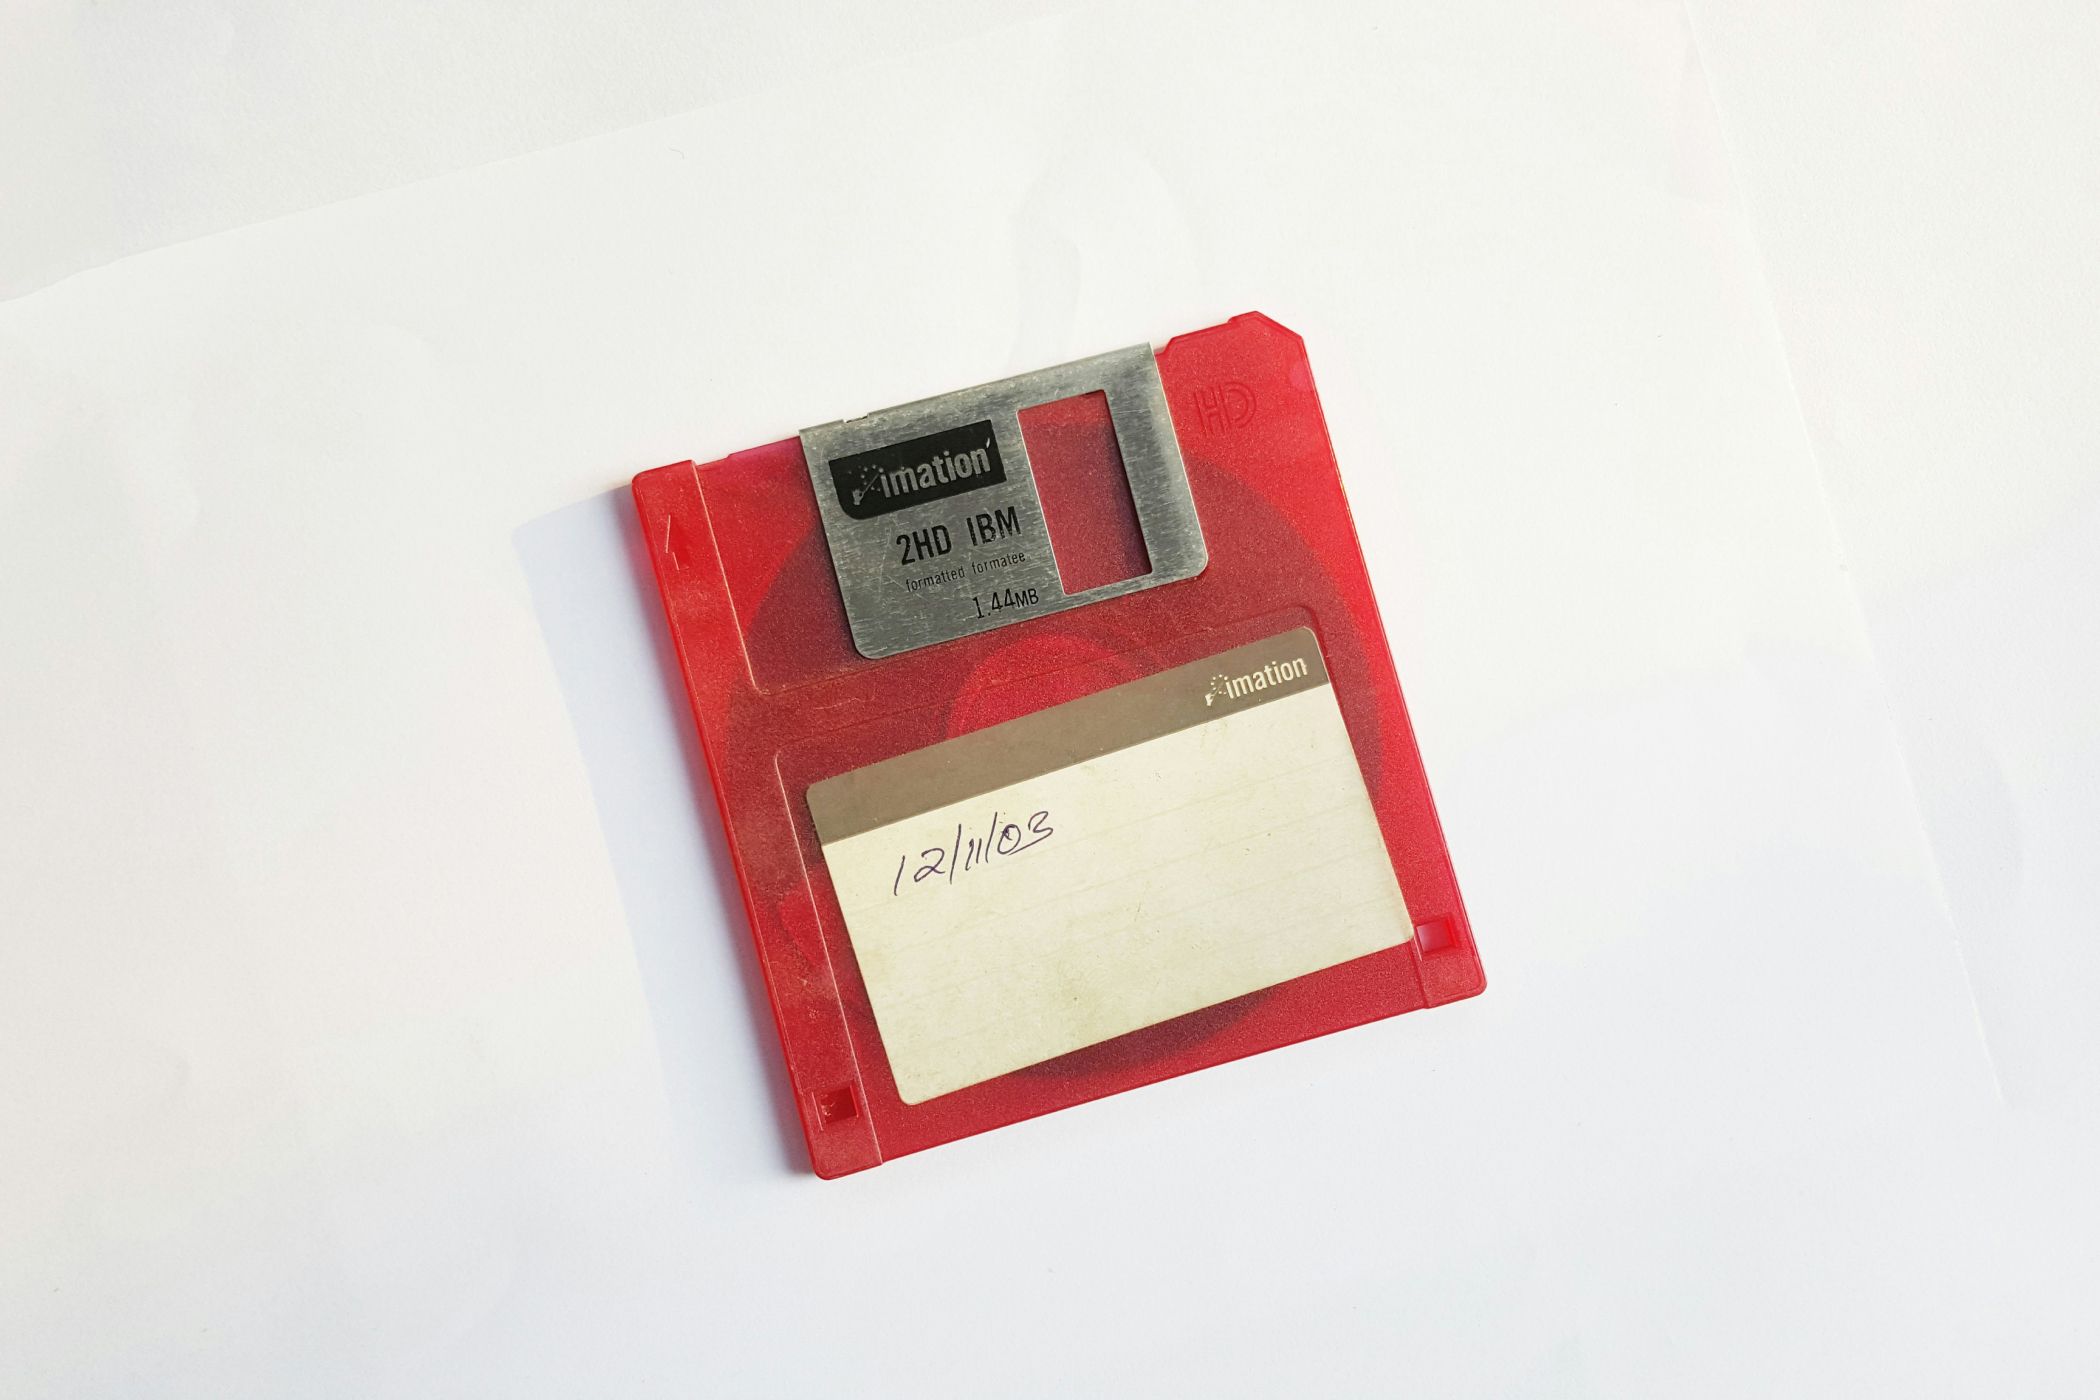 An image of a red floppy disk